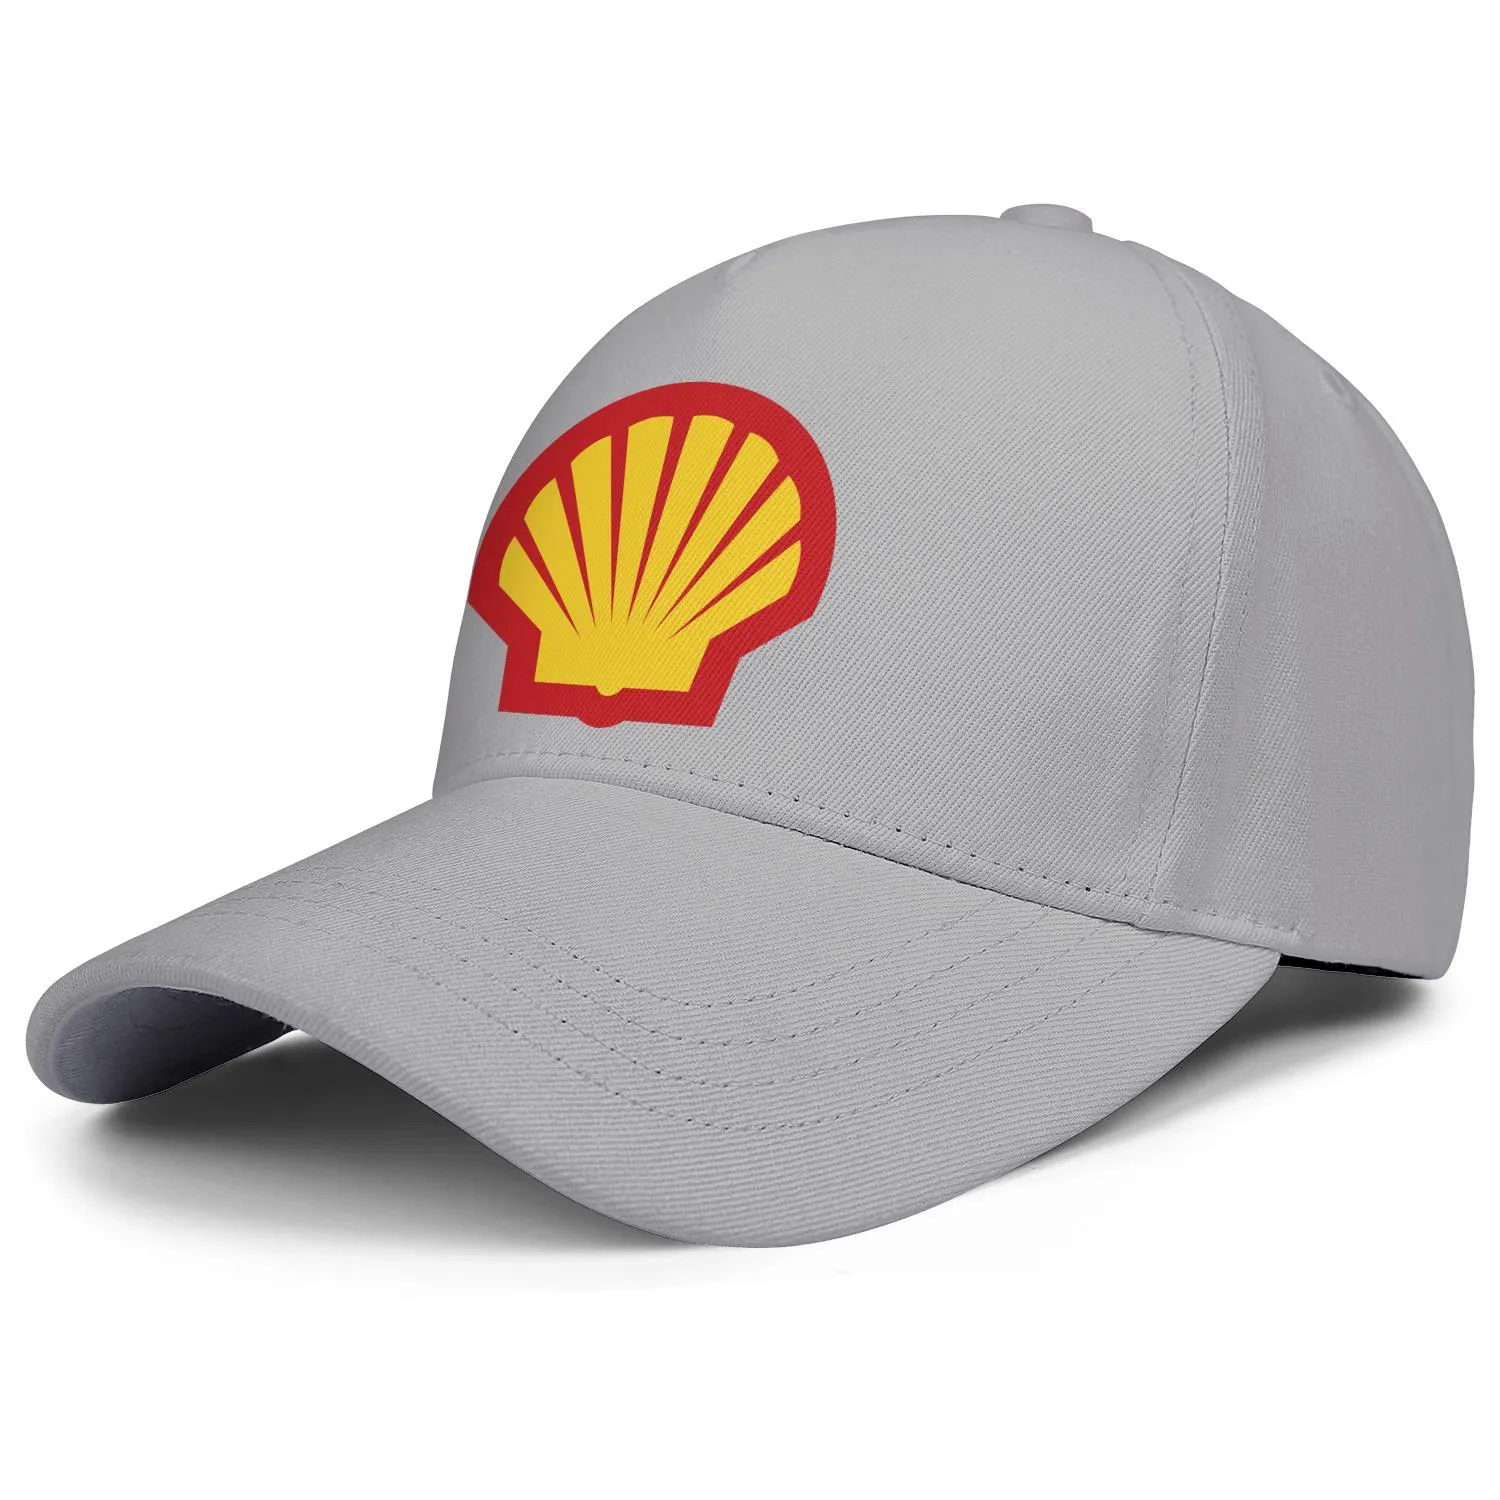 Shell gasoline gas station logo mens and women adjustable trucker cap fitted vintage cute baseballhats locator Gasoline symbo8984649